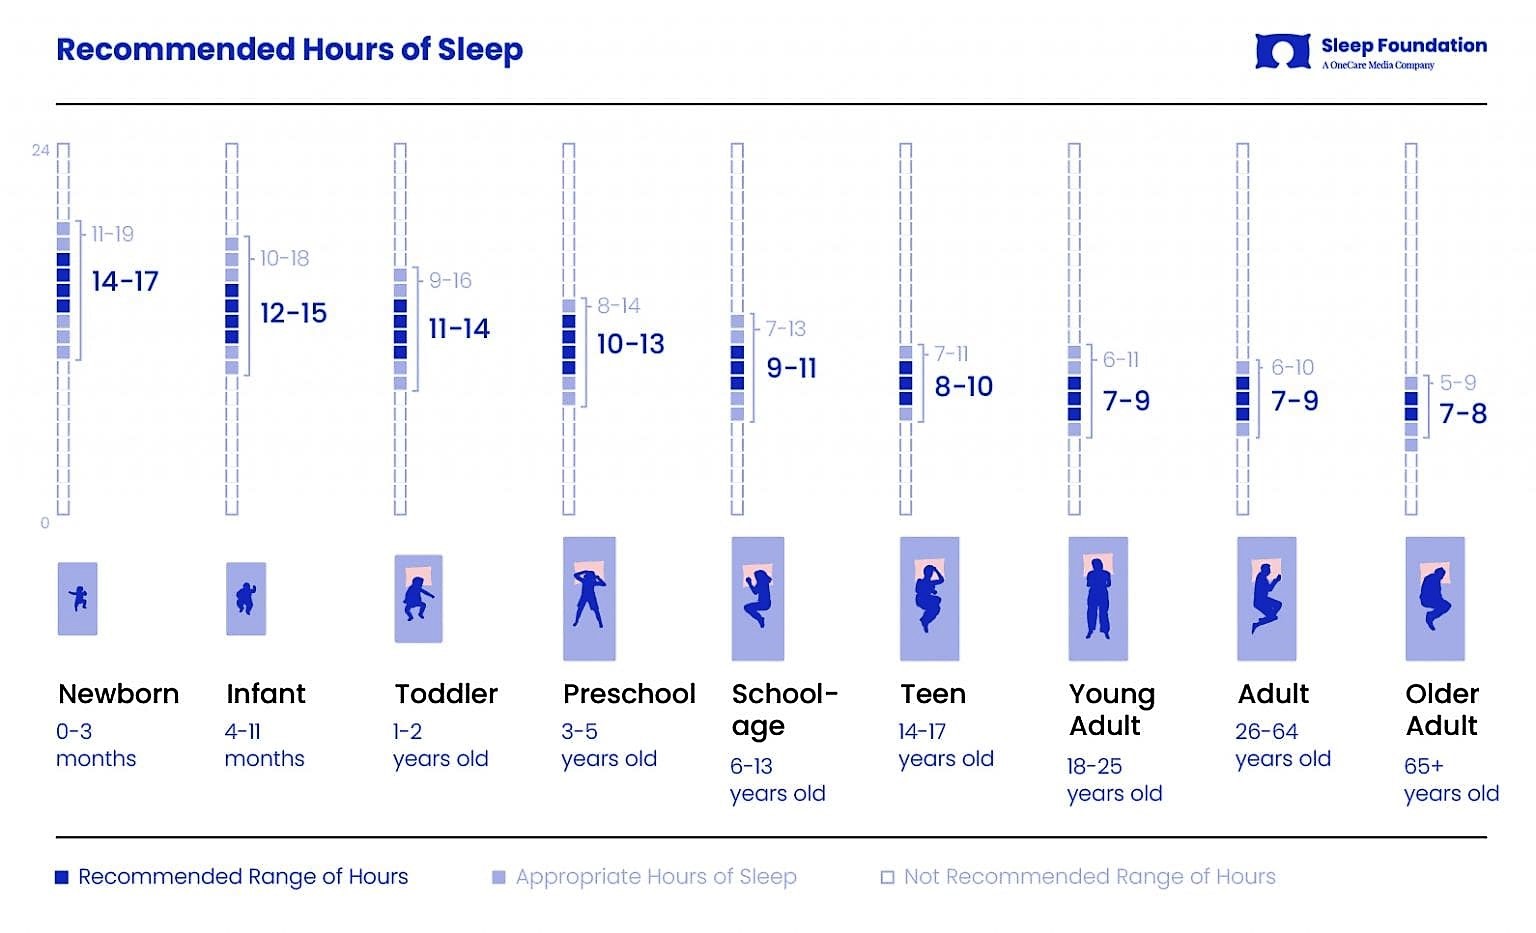 Sleep_Foundation_Recommended-Sleep_Infographic cac